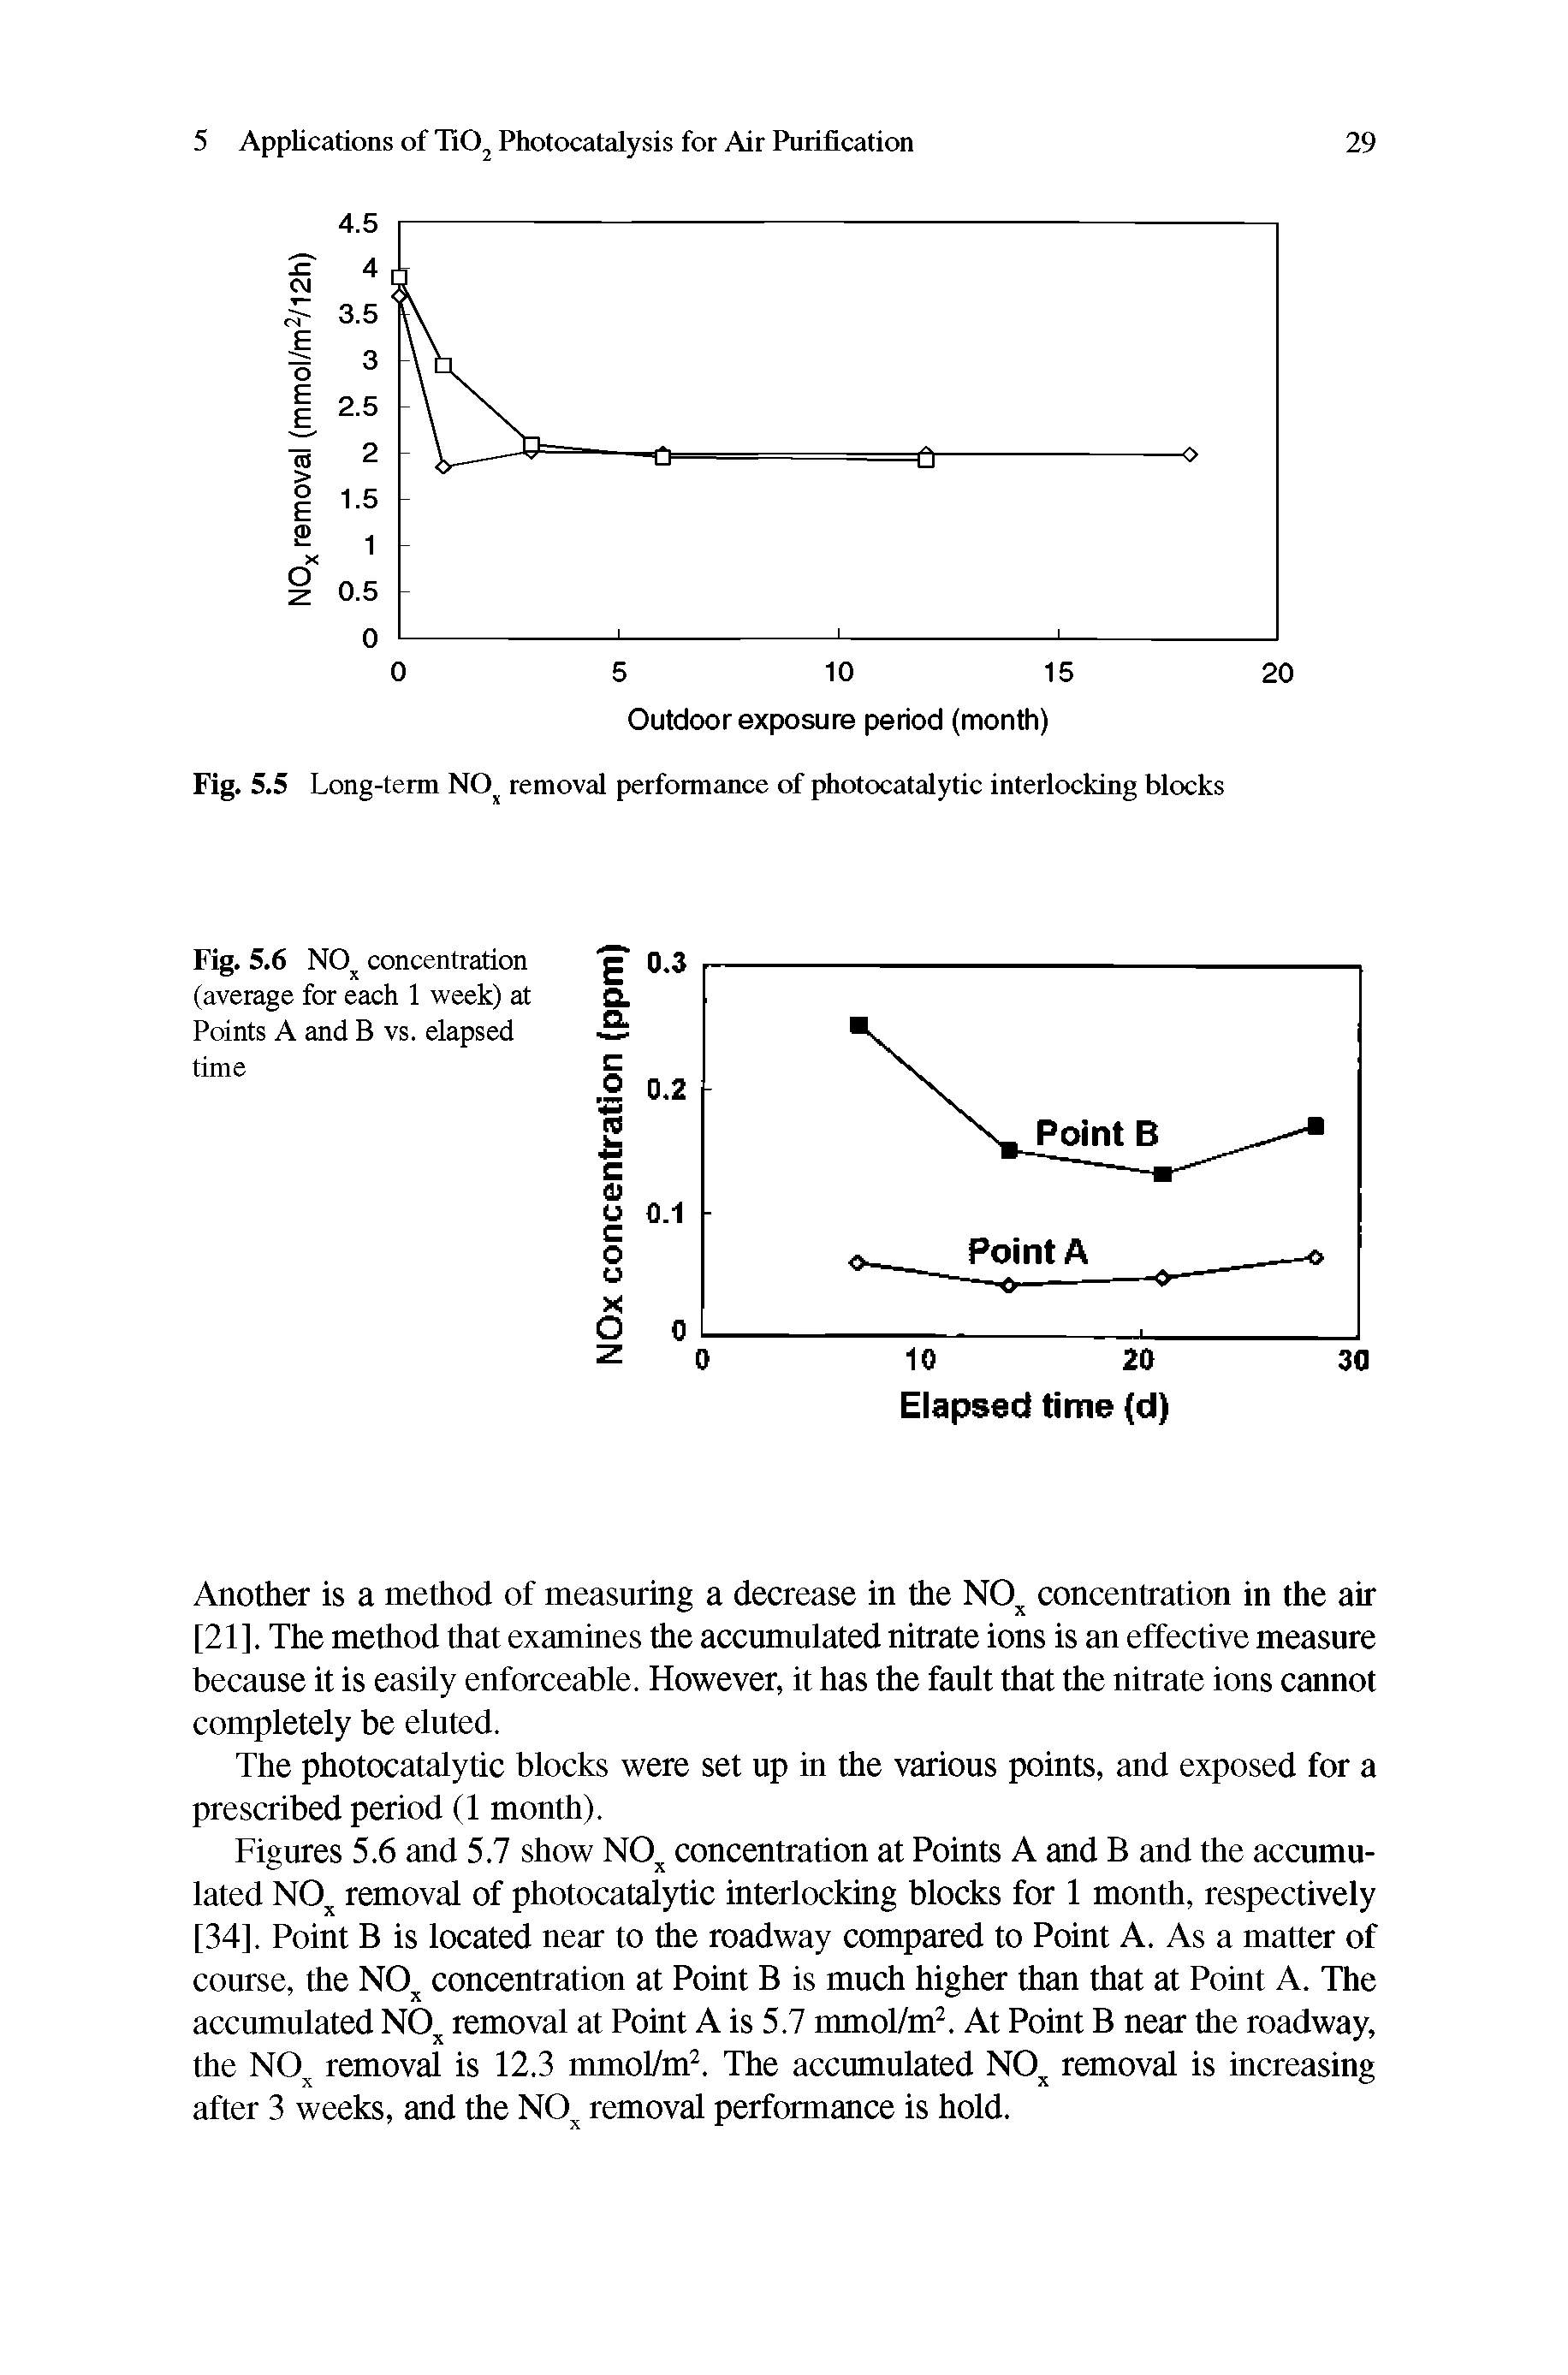 Figures 5.6 and 5.7 show NO concentration at Points A and B and the accumulated NO removal of photocatalytic interlocking blocks for 1 month, respectively [34], Point B is located near to the roadway compared to Point A. As a matter of course, the NO concentration at Point B is much higher than that at Point A. The accumulated NO removal at Point A is 5.7 mmol/m. At Point B near the roadway, the NO removal is 12.3 mmol/m. The accumulated NO removal is increasing after 3 weeks, and the NO removal performance is hold.